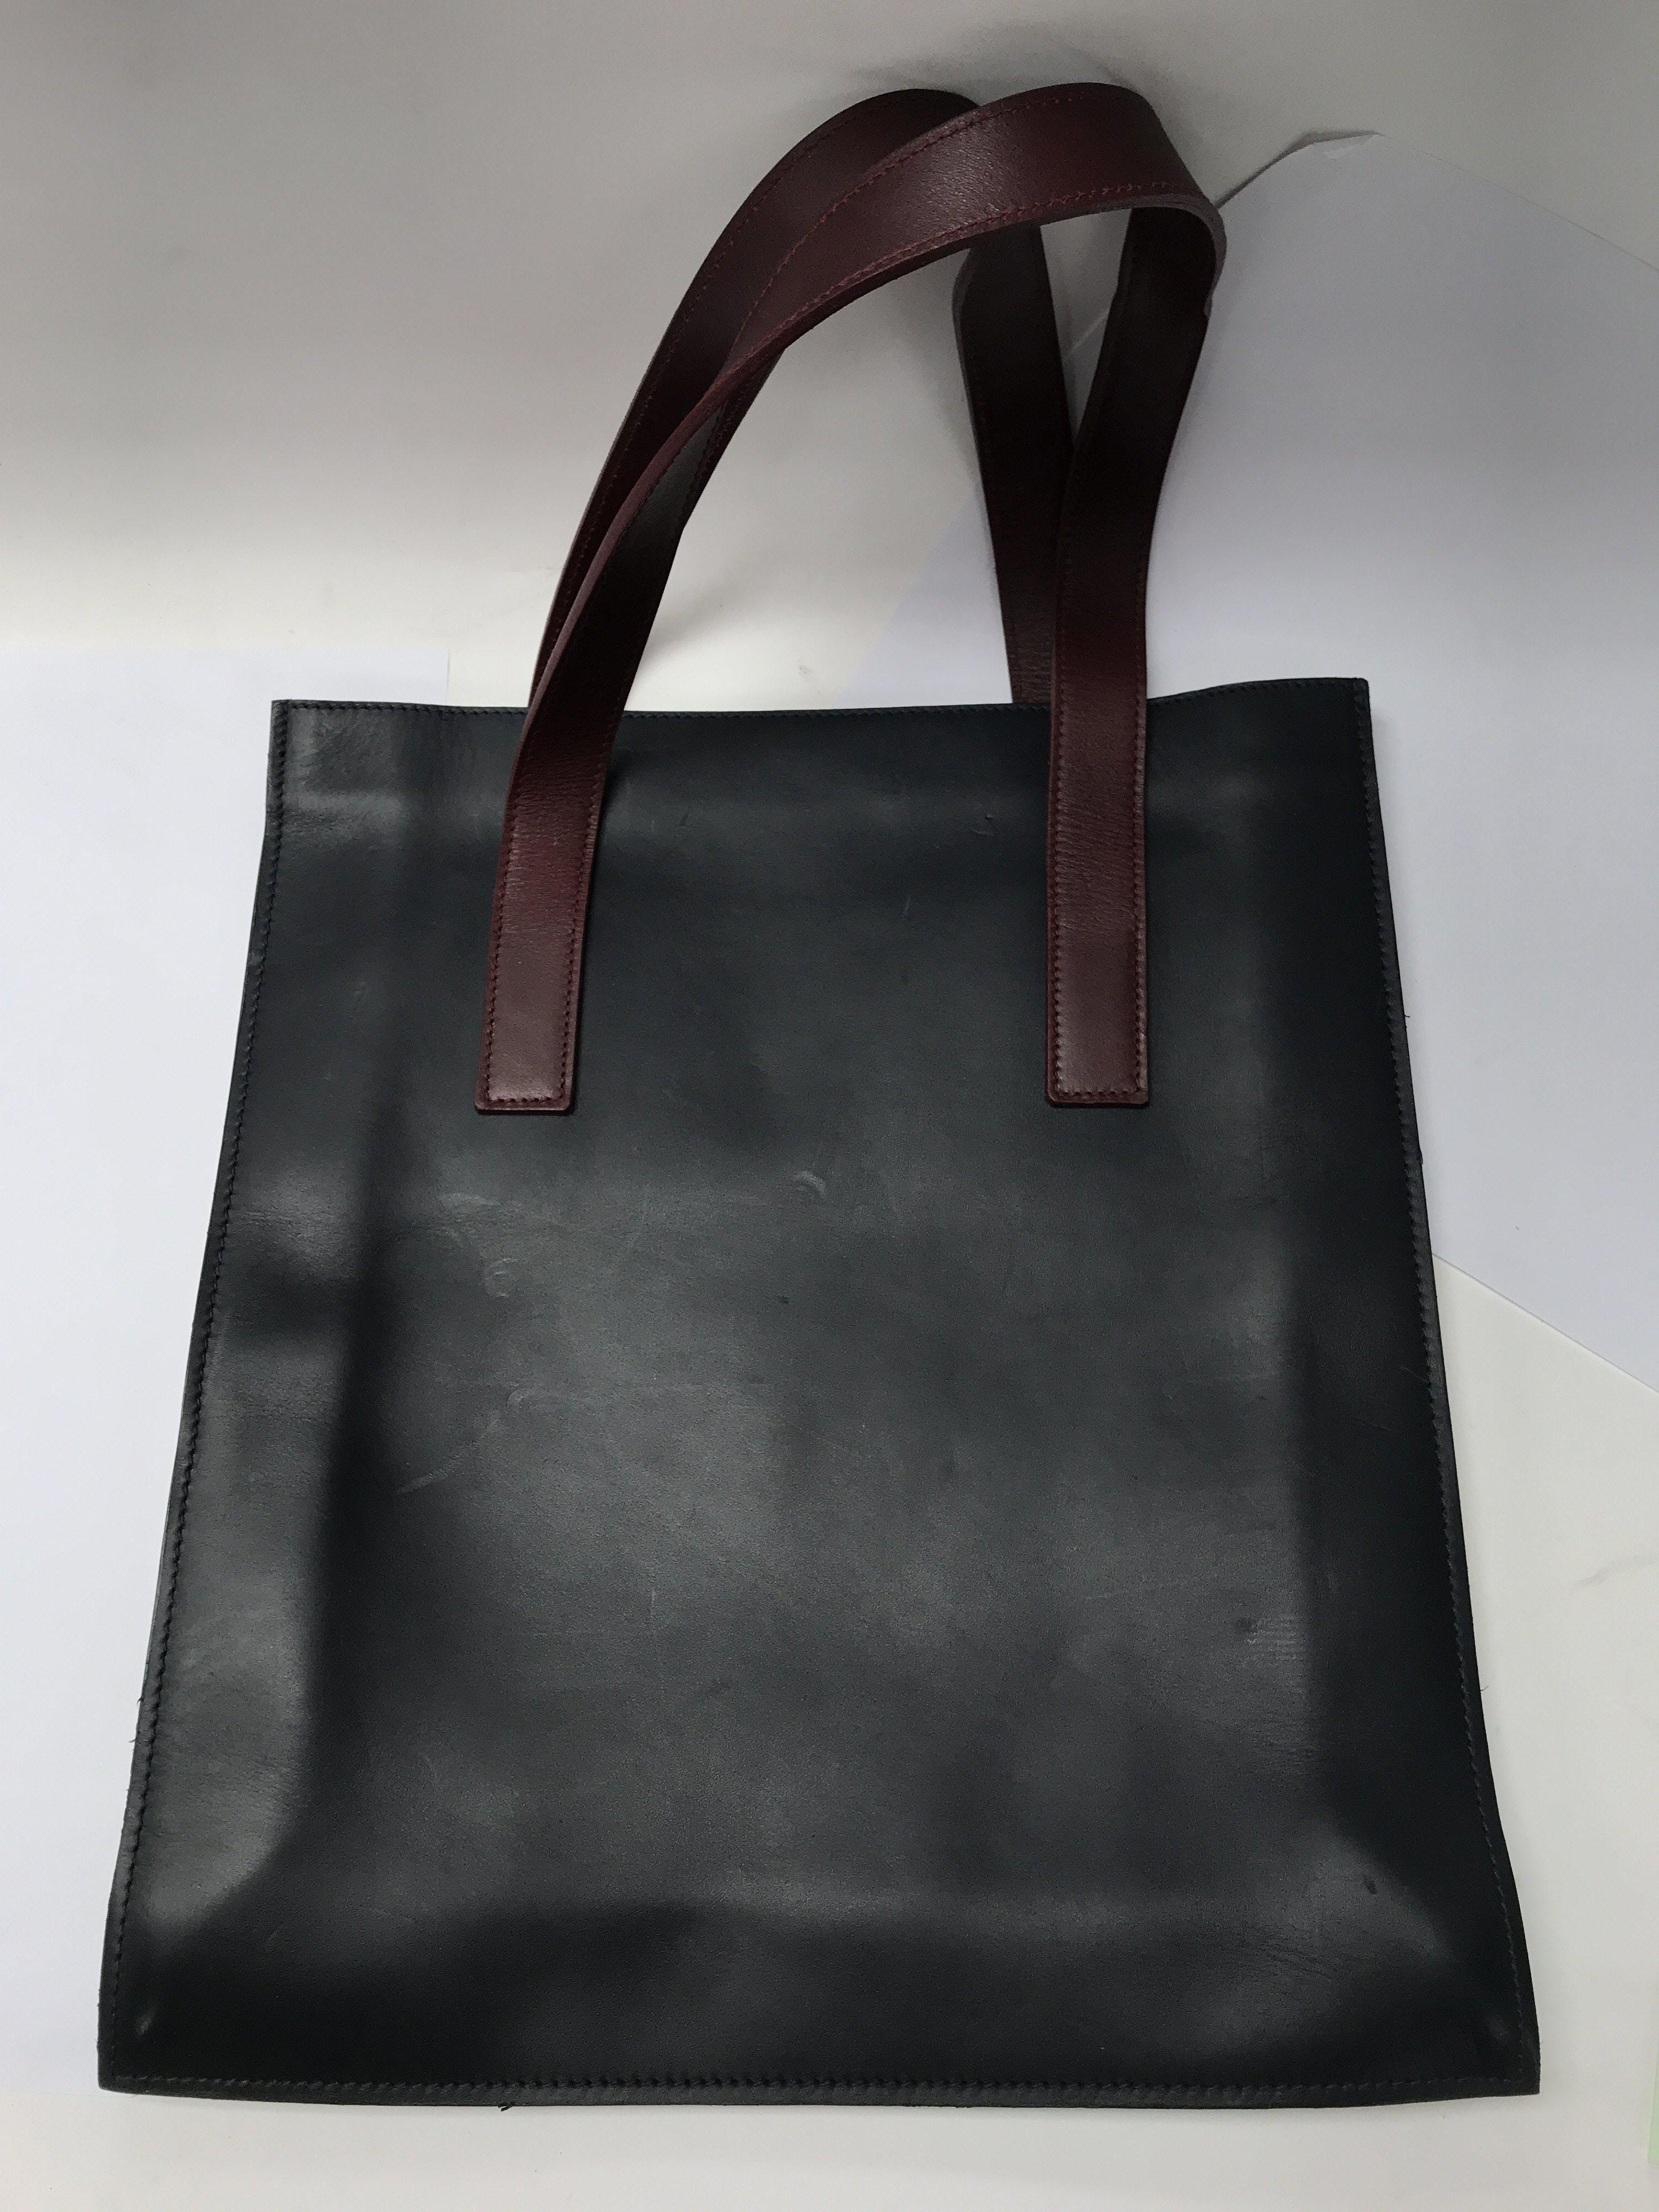 A good quality leather tote bag, dark blue and bur